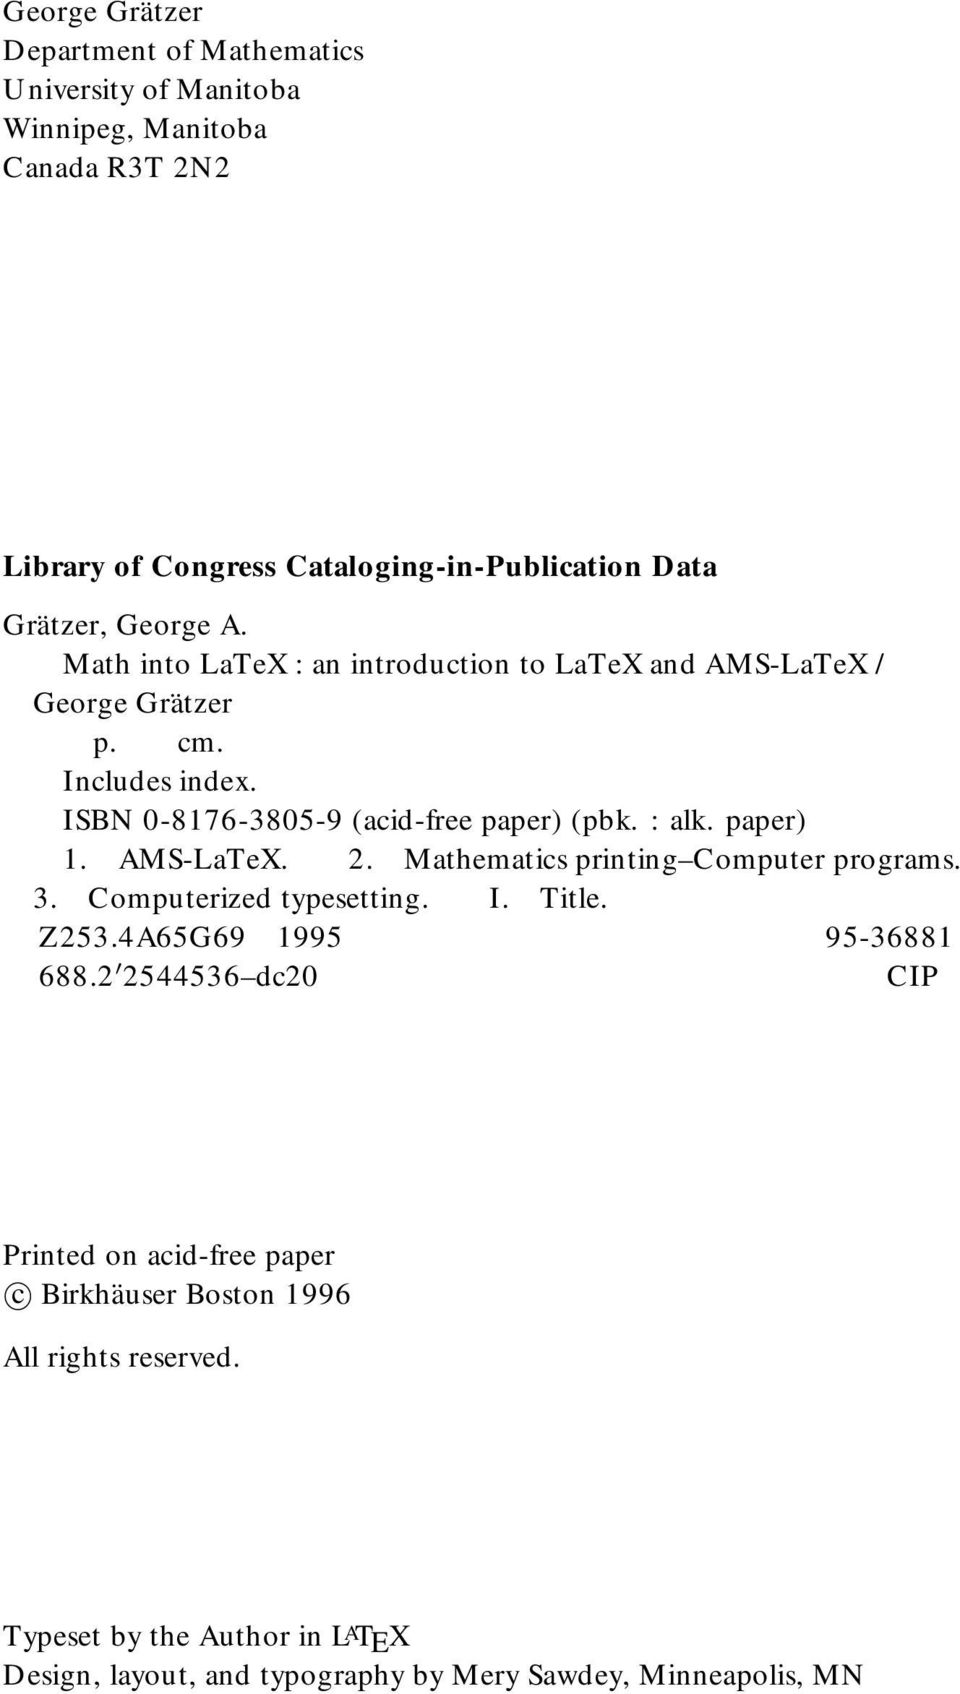 paper) 1. AMS-LaTeX. 2. Mathematics printing Computer programs. 3. Computerized typesetting. I. Title. Z253.4A65G69 1995 95-36881 688.